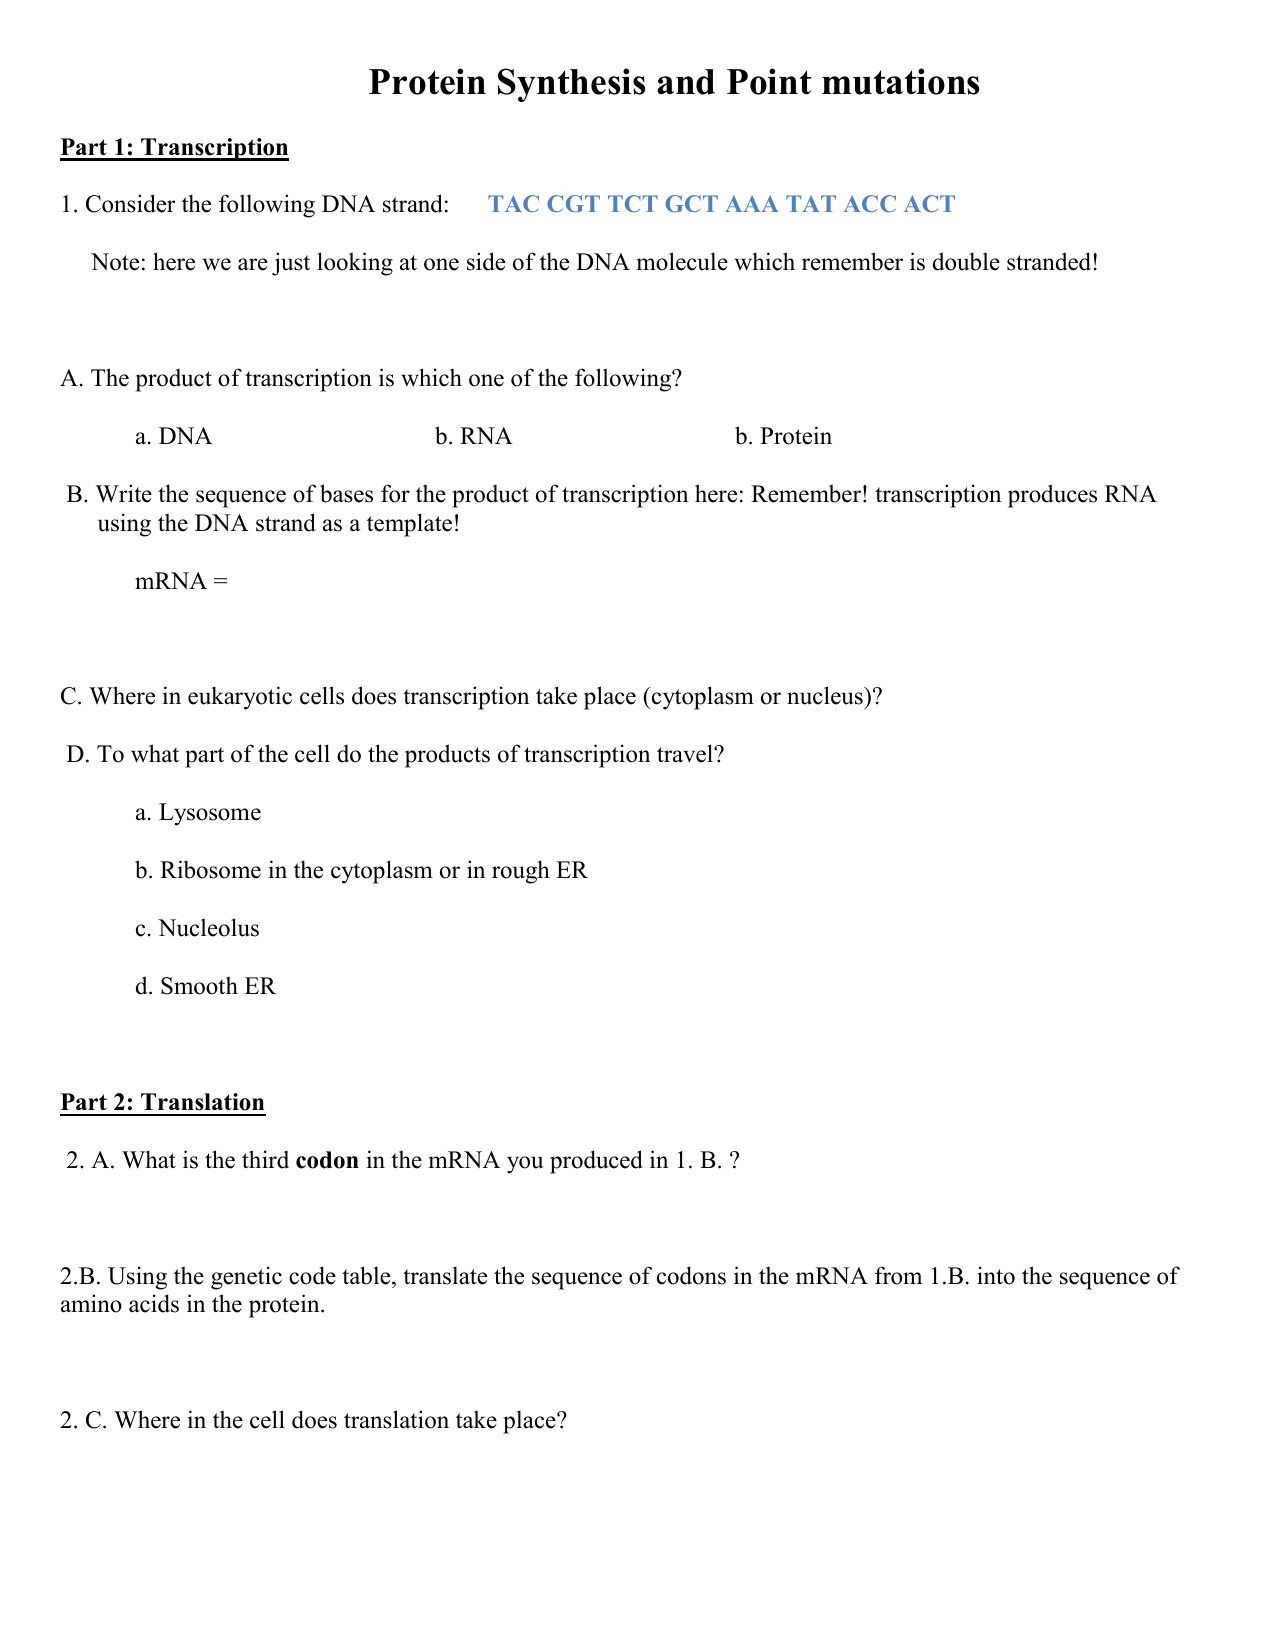 Protein synthesis and point mutations (24 points) With Protein Synthesis Review Worksheet Answers